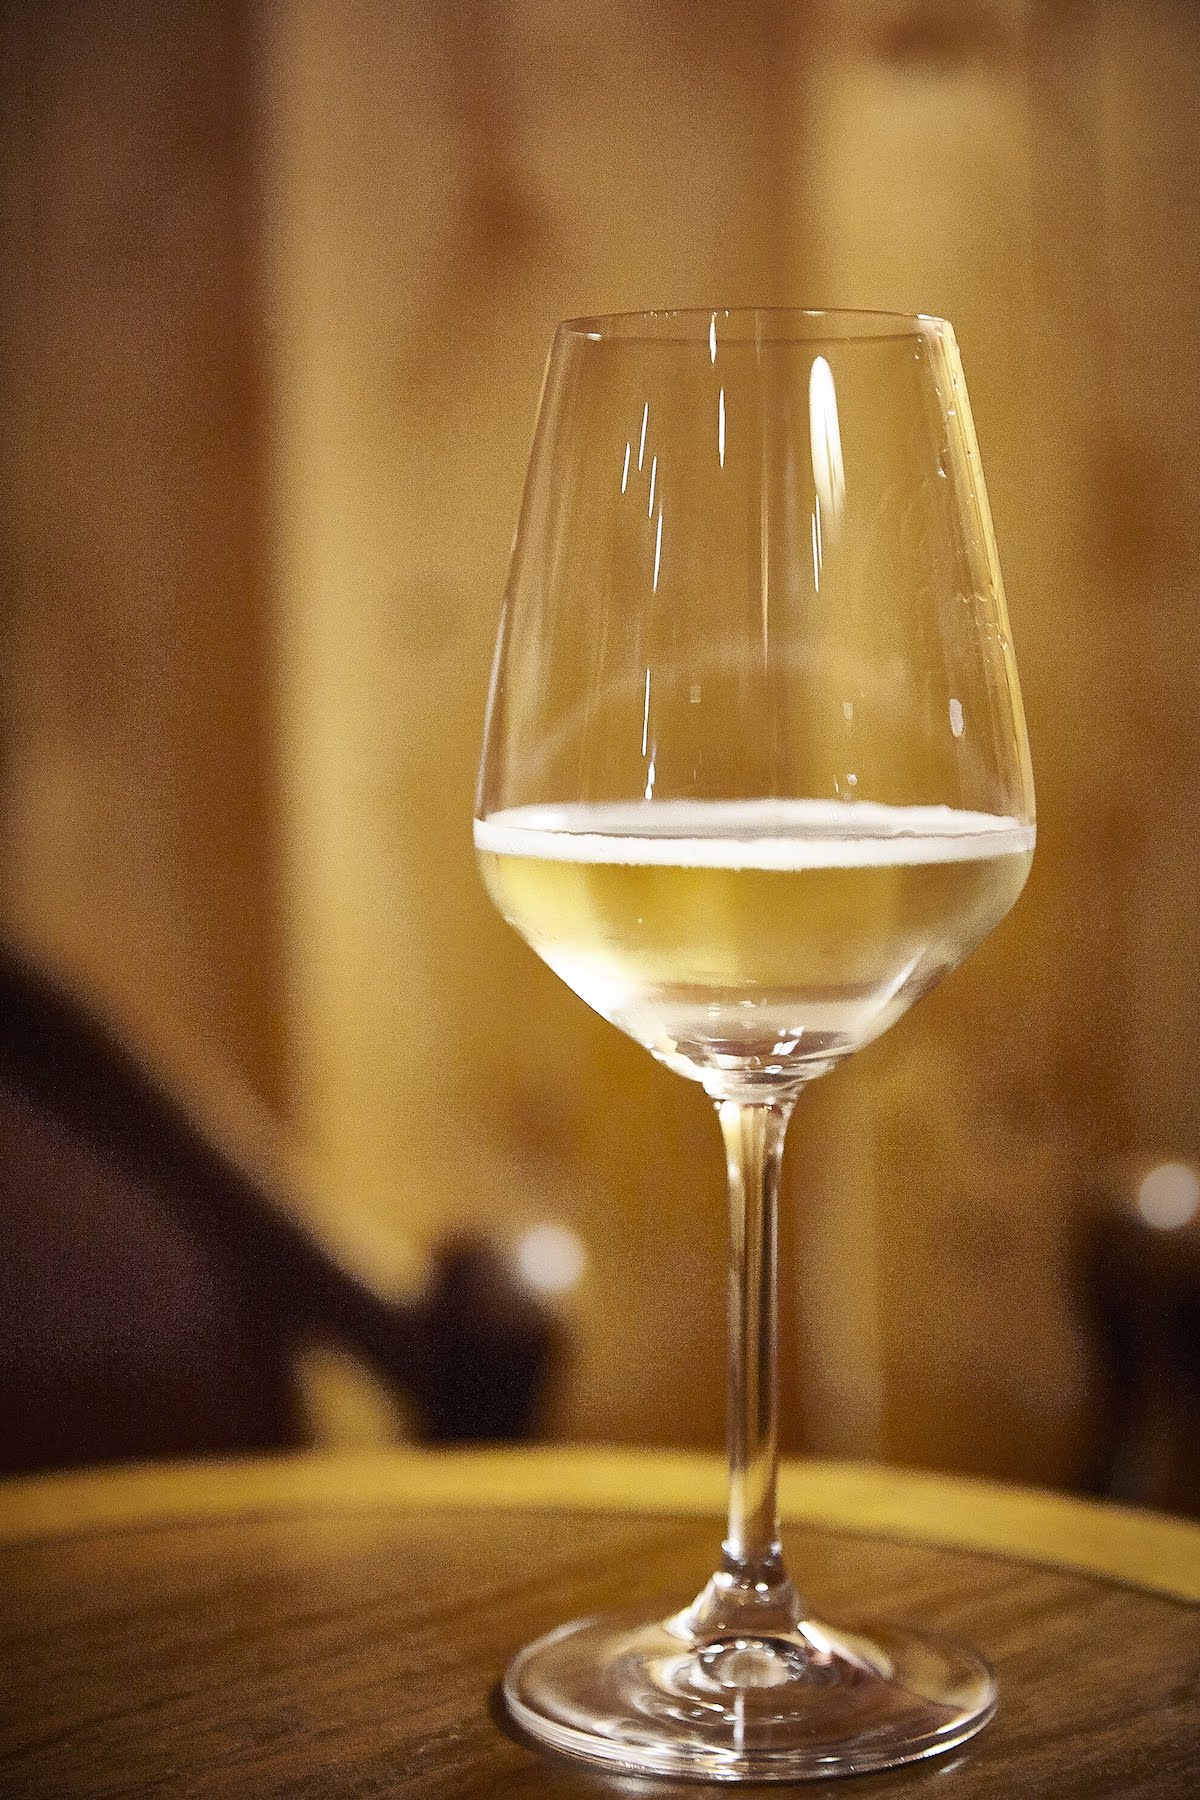 Glass of white wine on a wooden surface